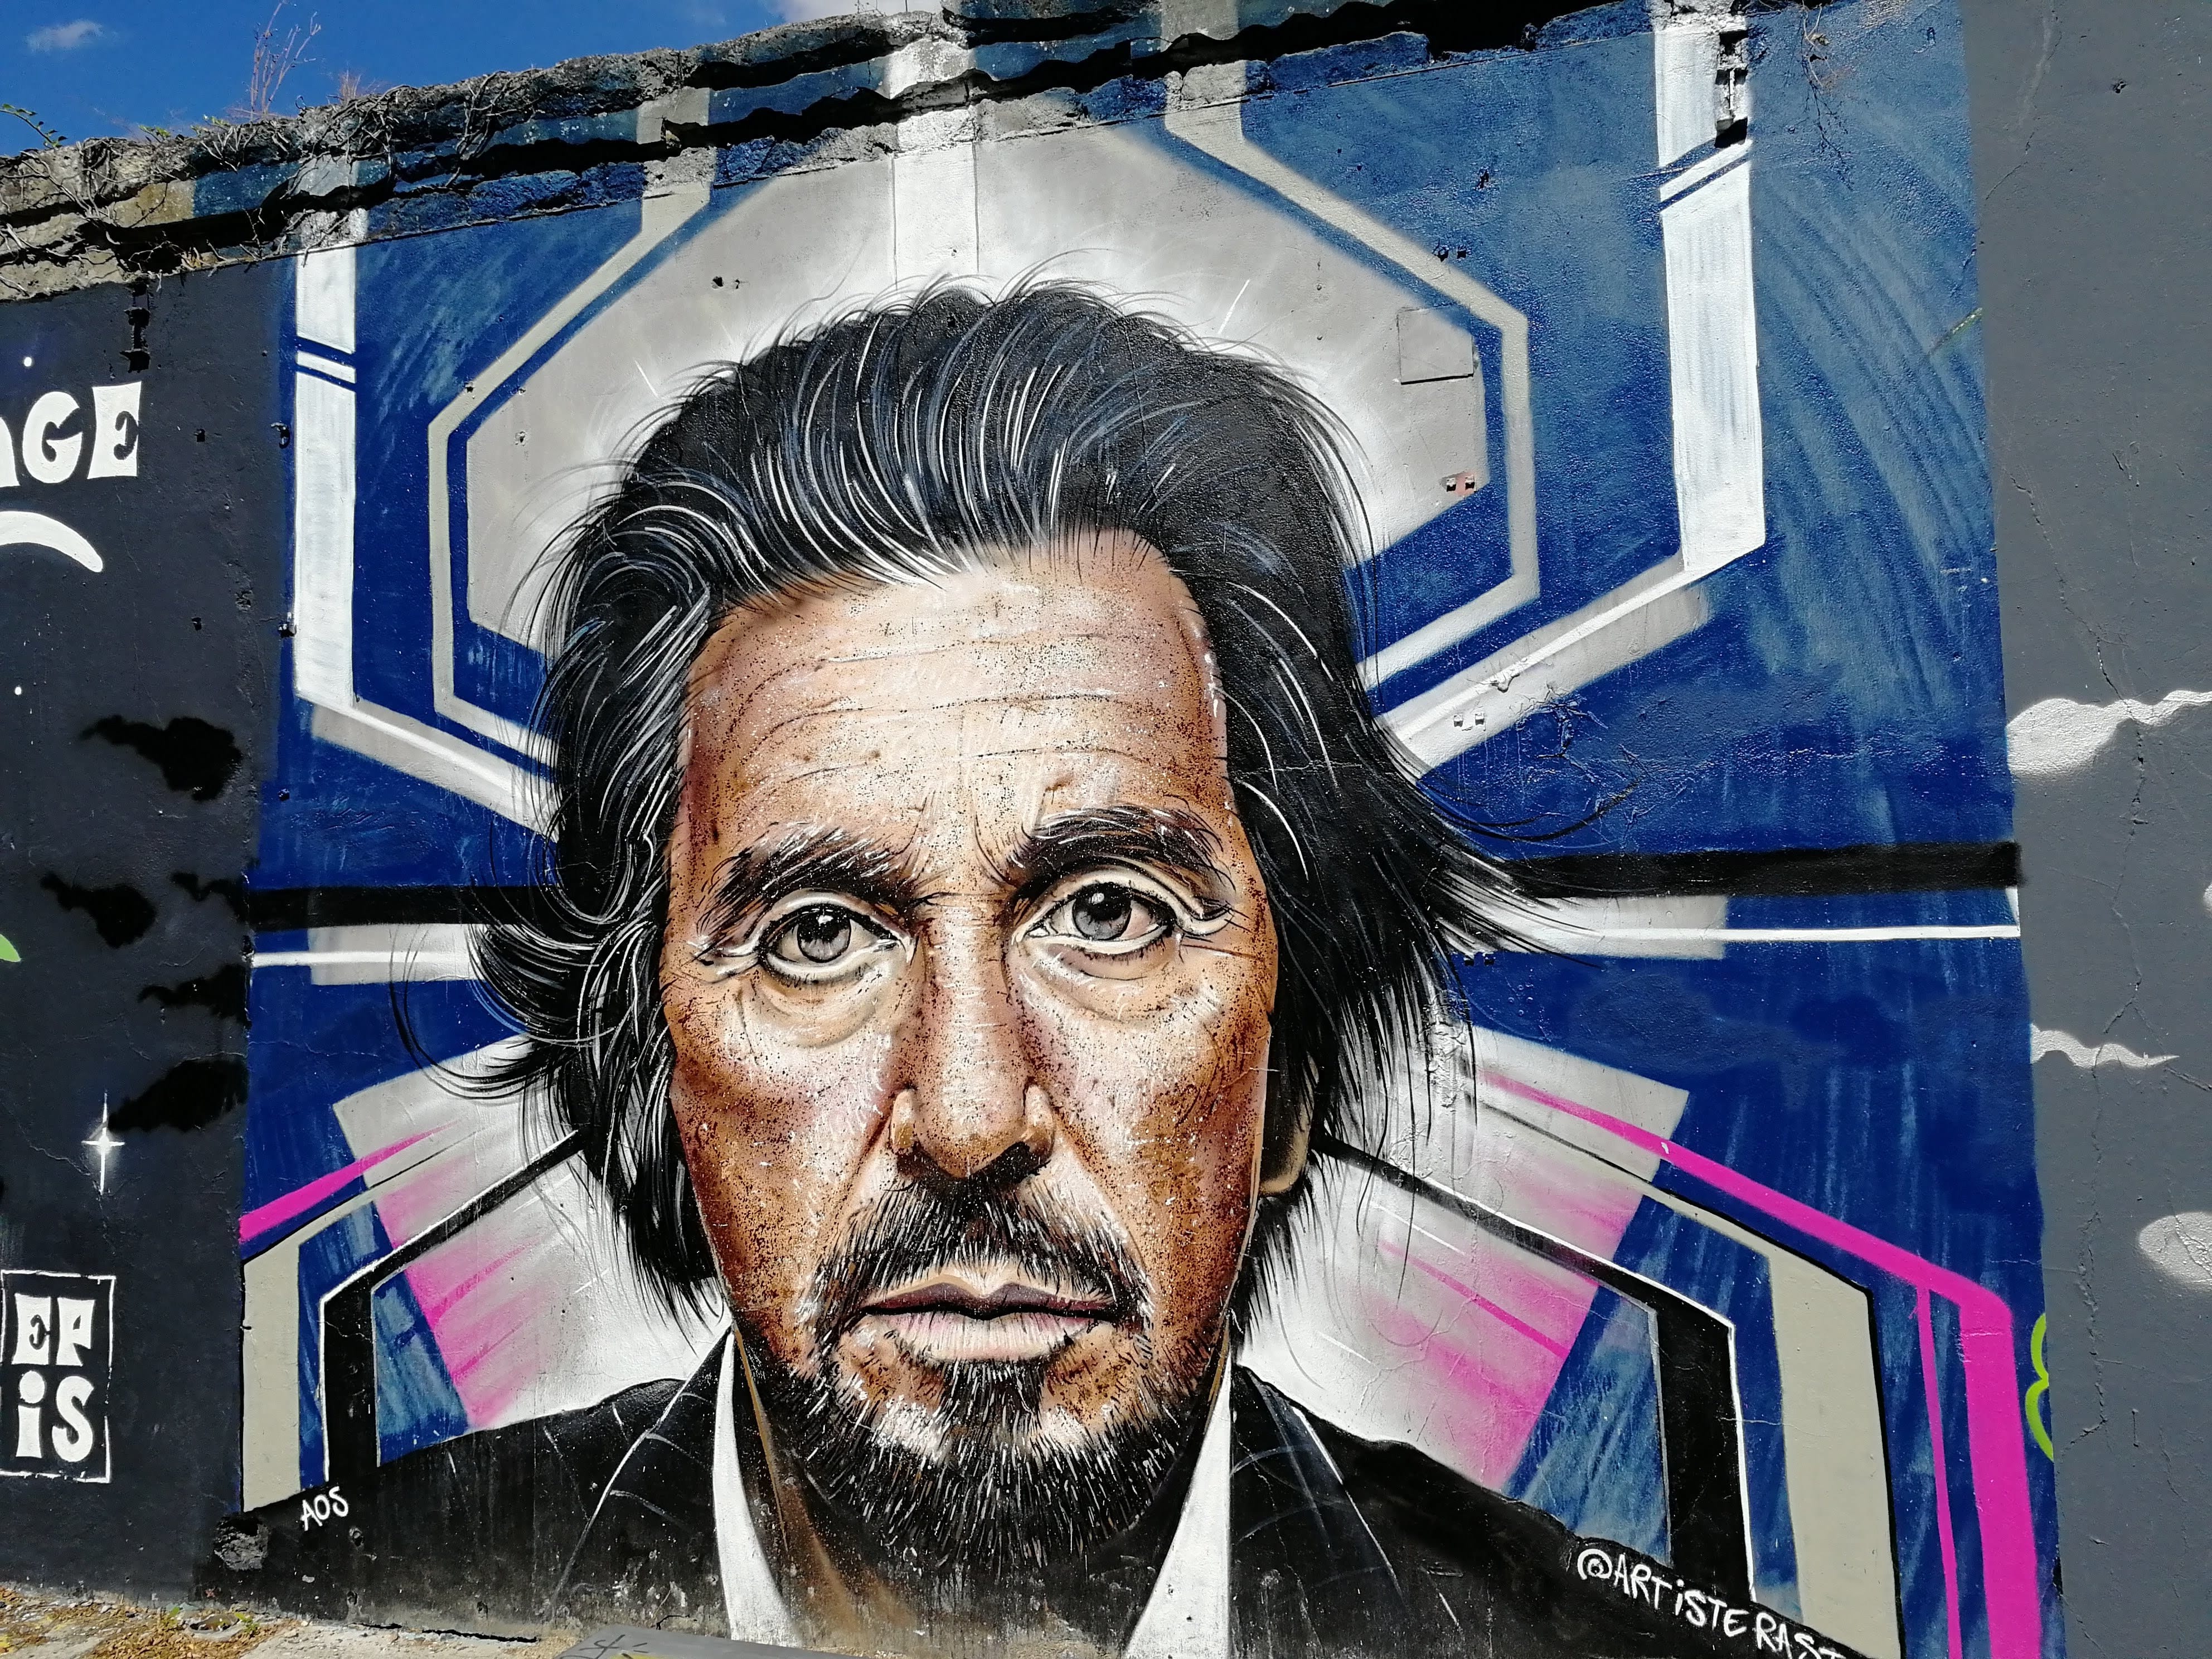 Graffiti 5545 Al Pacino by the artist Rast captured by Rabot in Bordeaux France